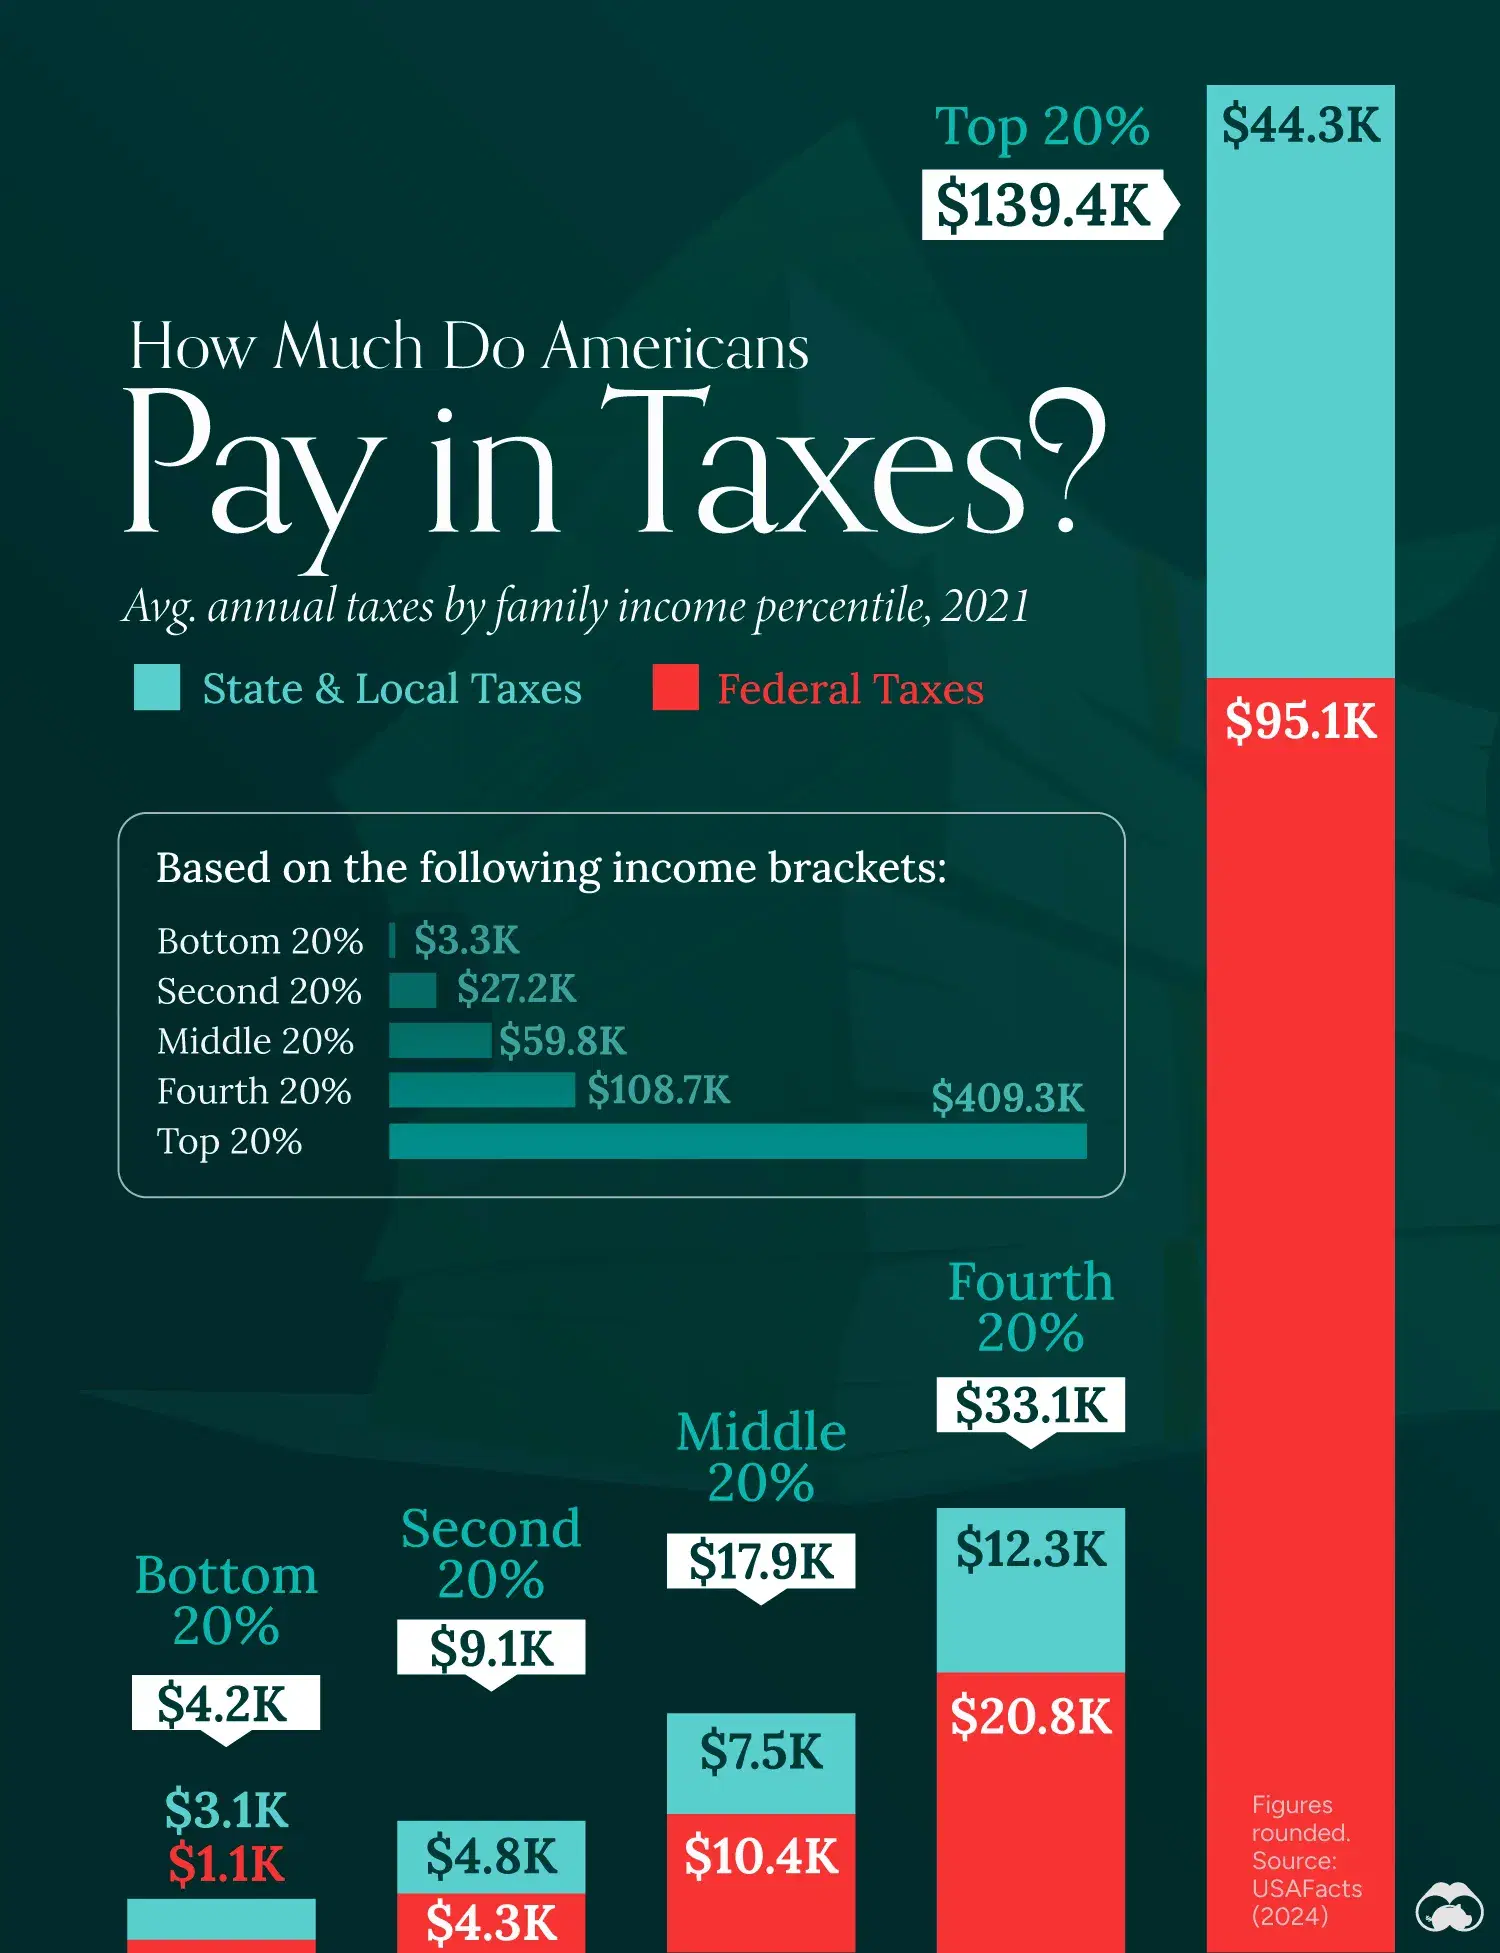 The Average Middle Class Family in the U.S. Pays $17.9K in Taxes